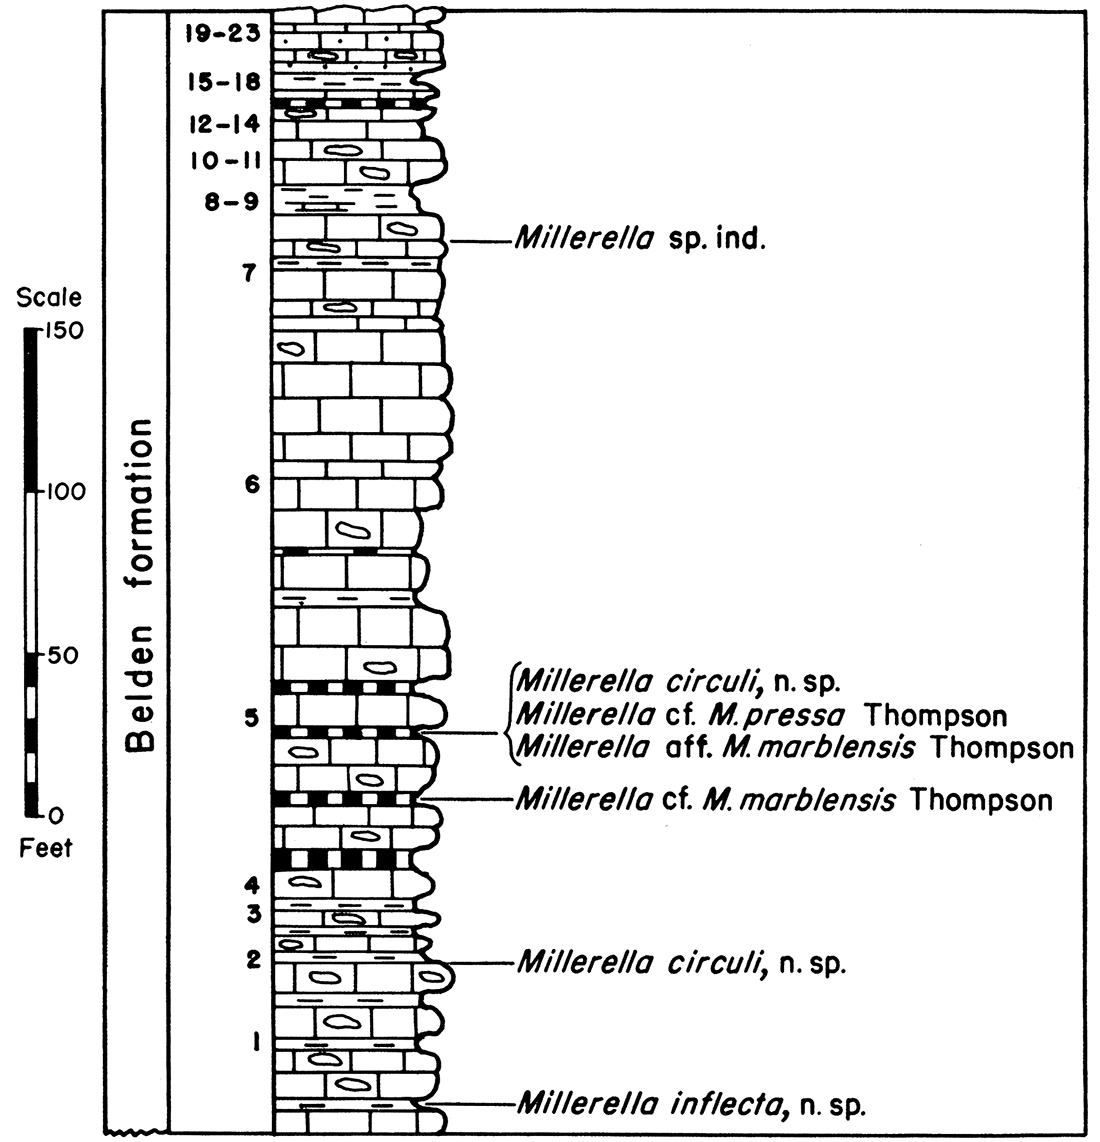 Diagram and fusulinid faunas of the Belden formation, Section P-9, Sheep Mountain Canyon.